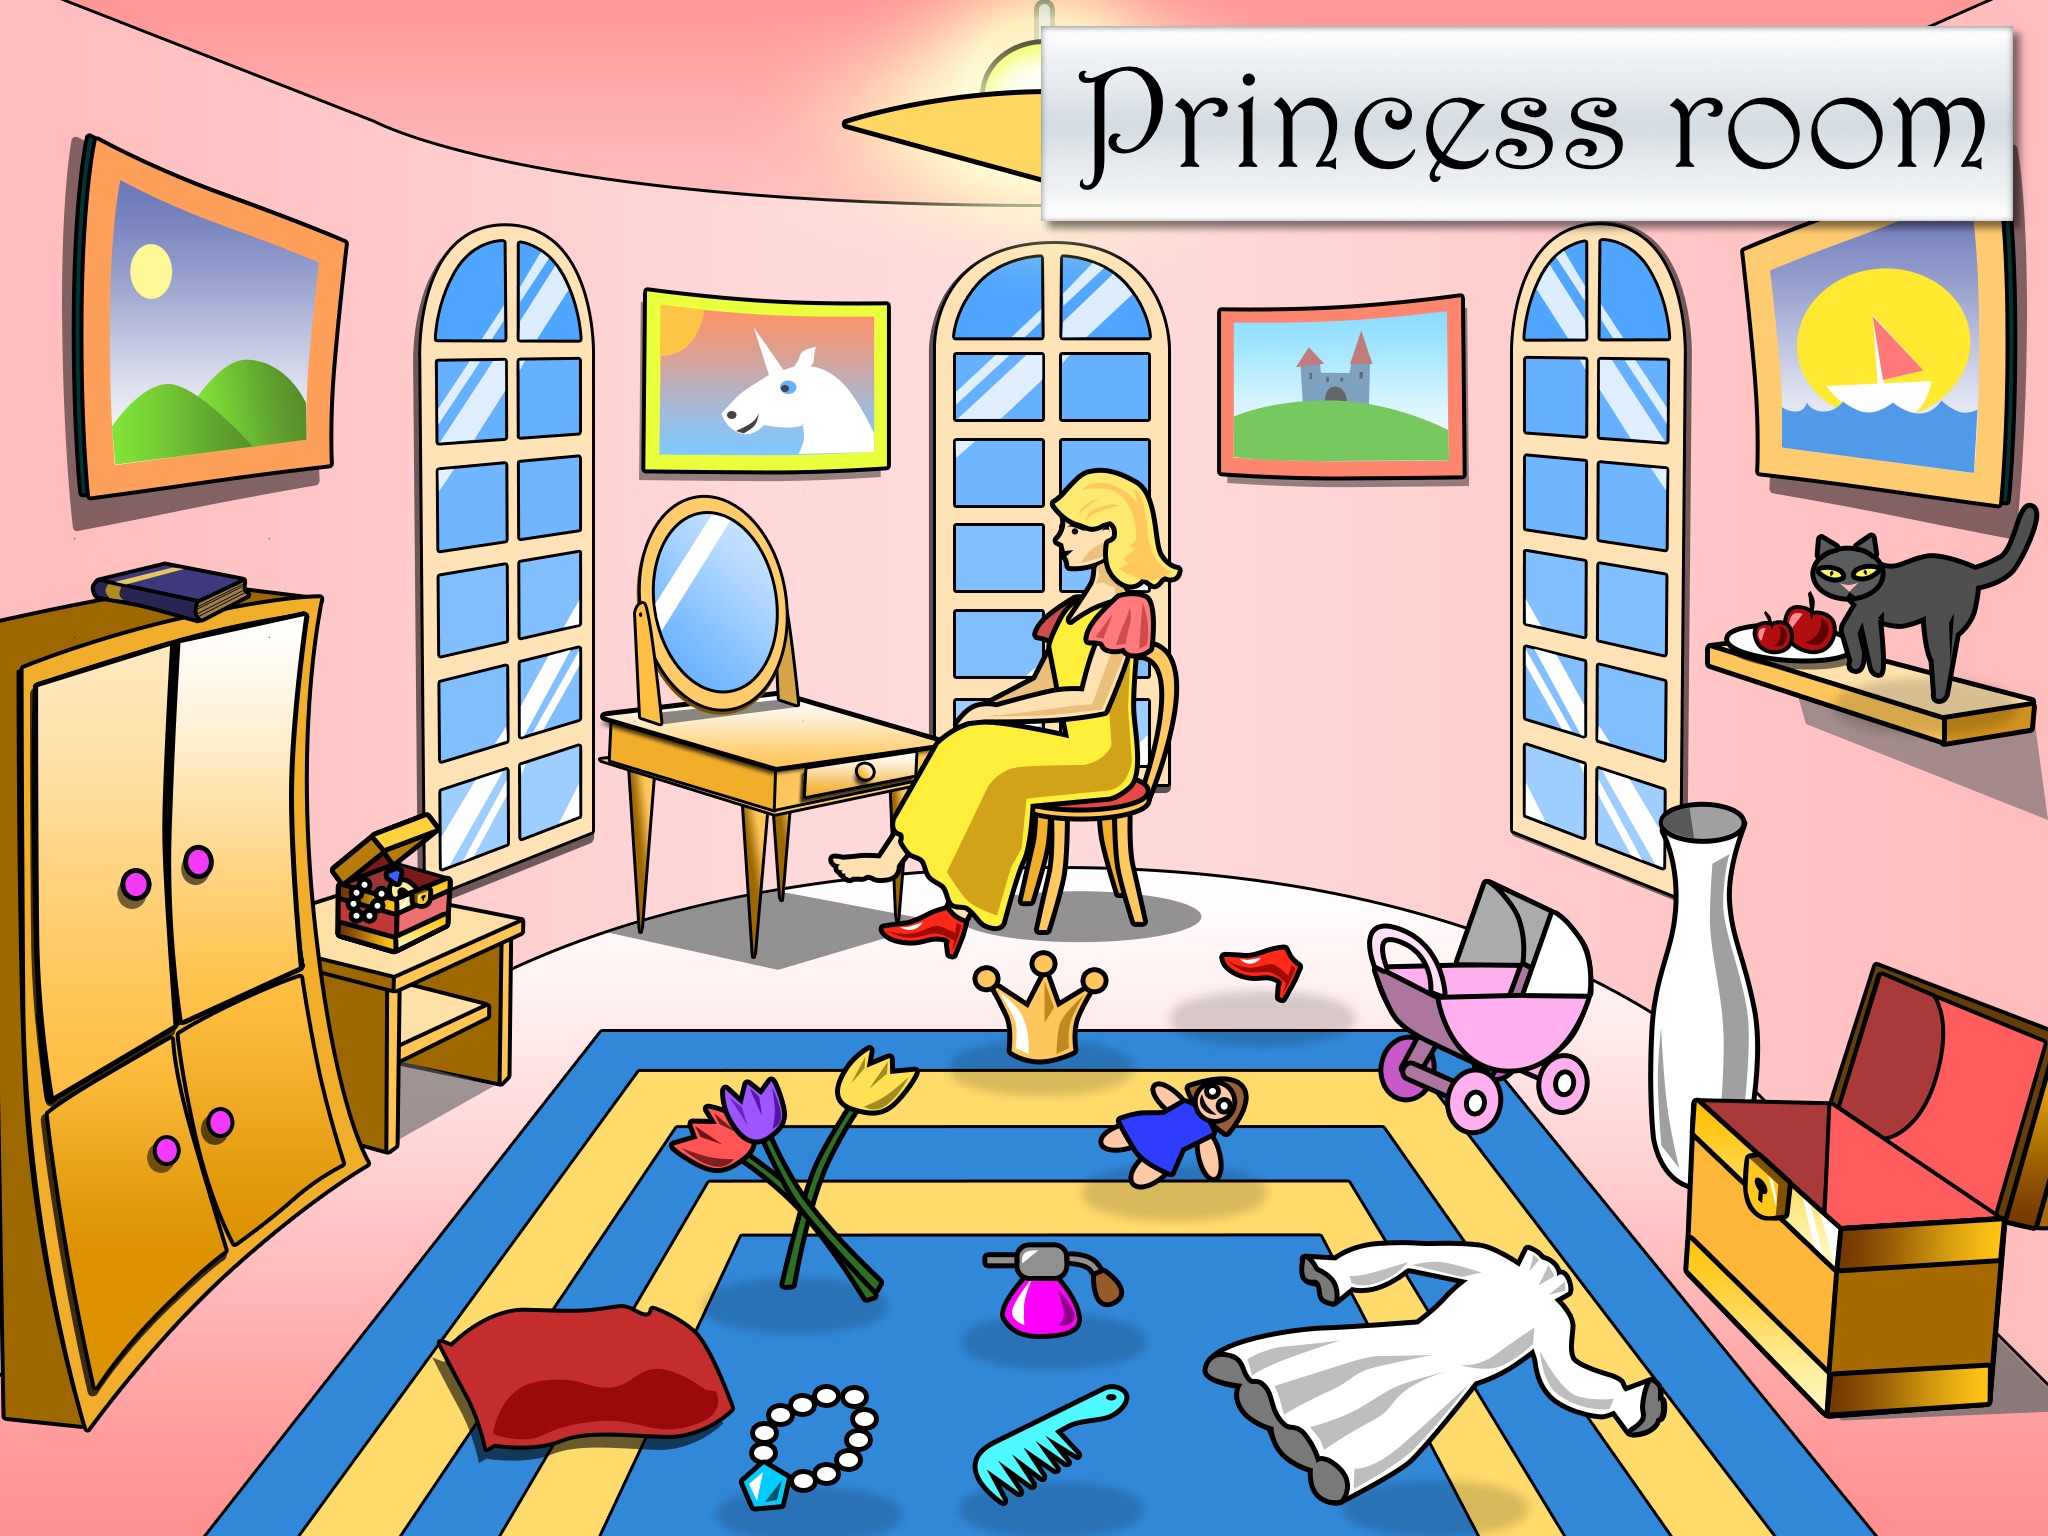 Fantasy tidy up - fairy tale cleaning game screenshot 2